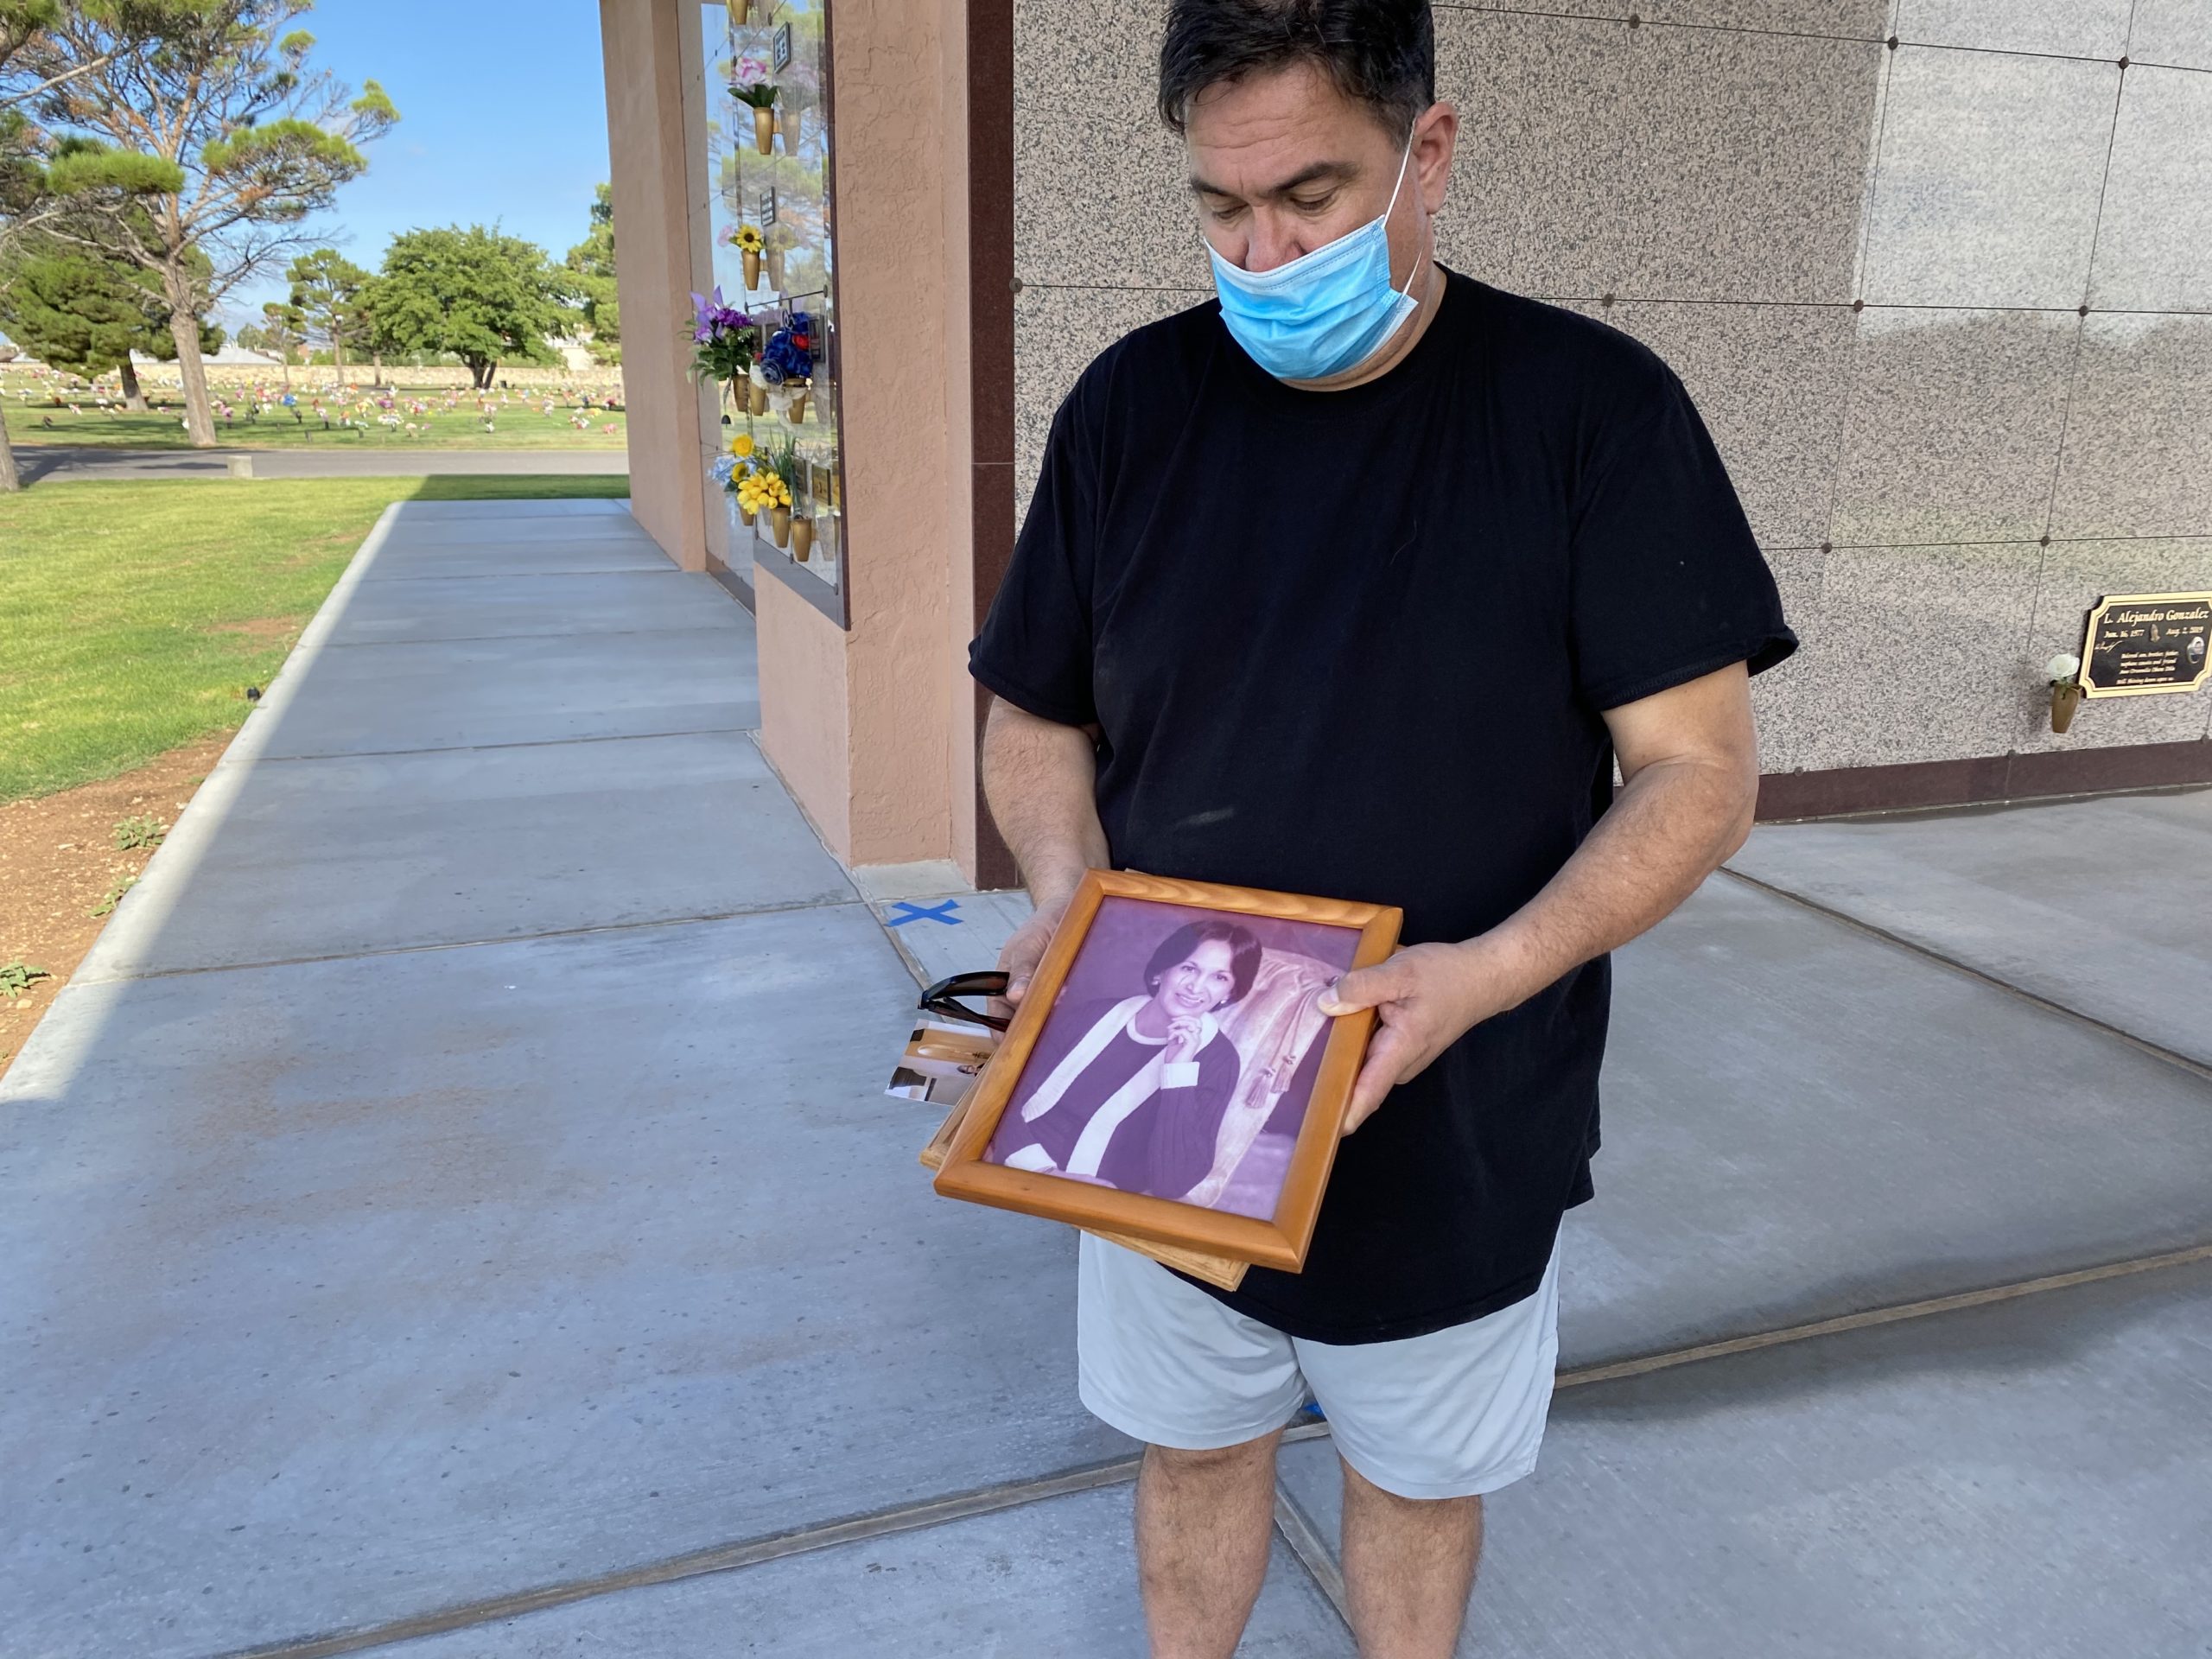 William Englisbee’s holds a photo of his 86-year-old mother, Angelina Maria Silva de Englisbee, at Evergreen Cemetery in El Paso. She was one of 23 victims killed August 3, 2019 during a mass shooting inside a Walmart.